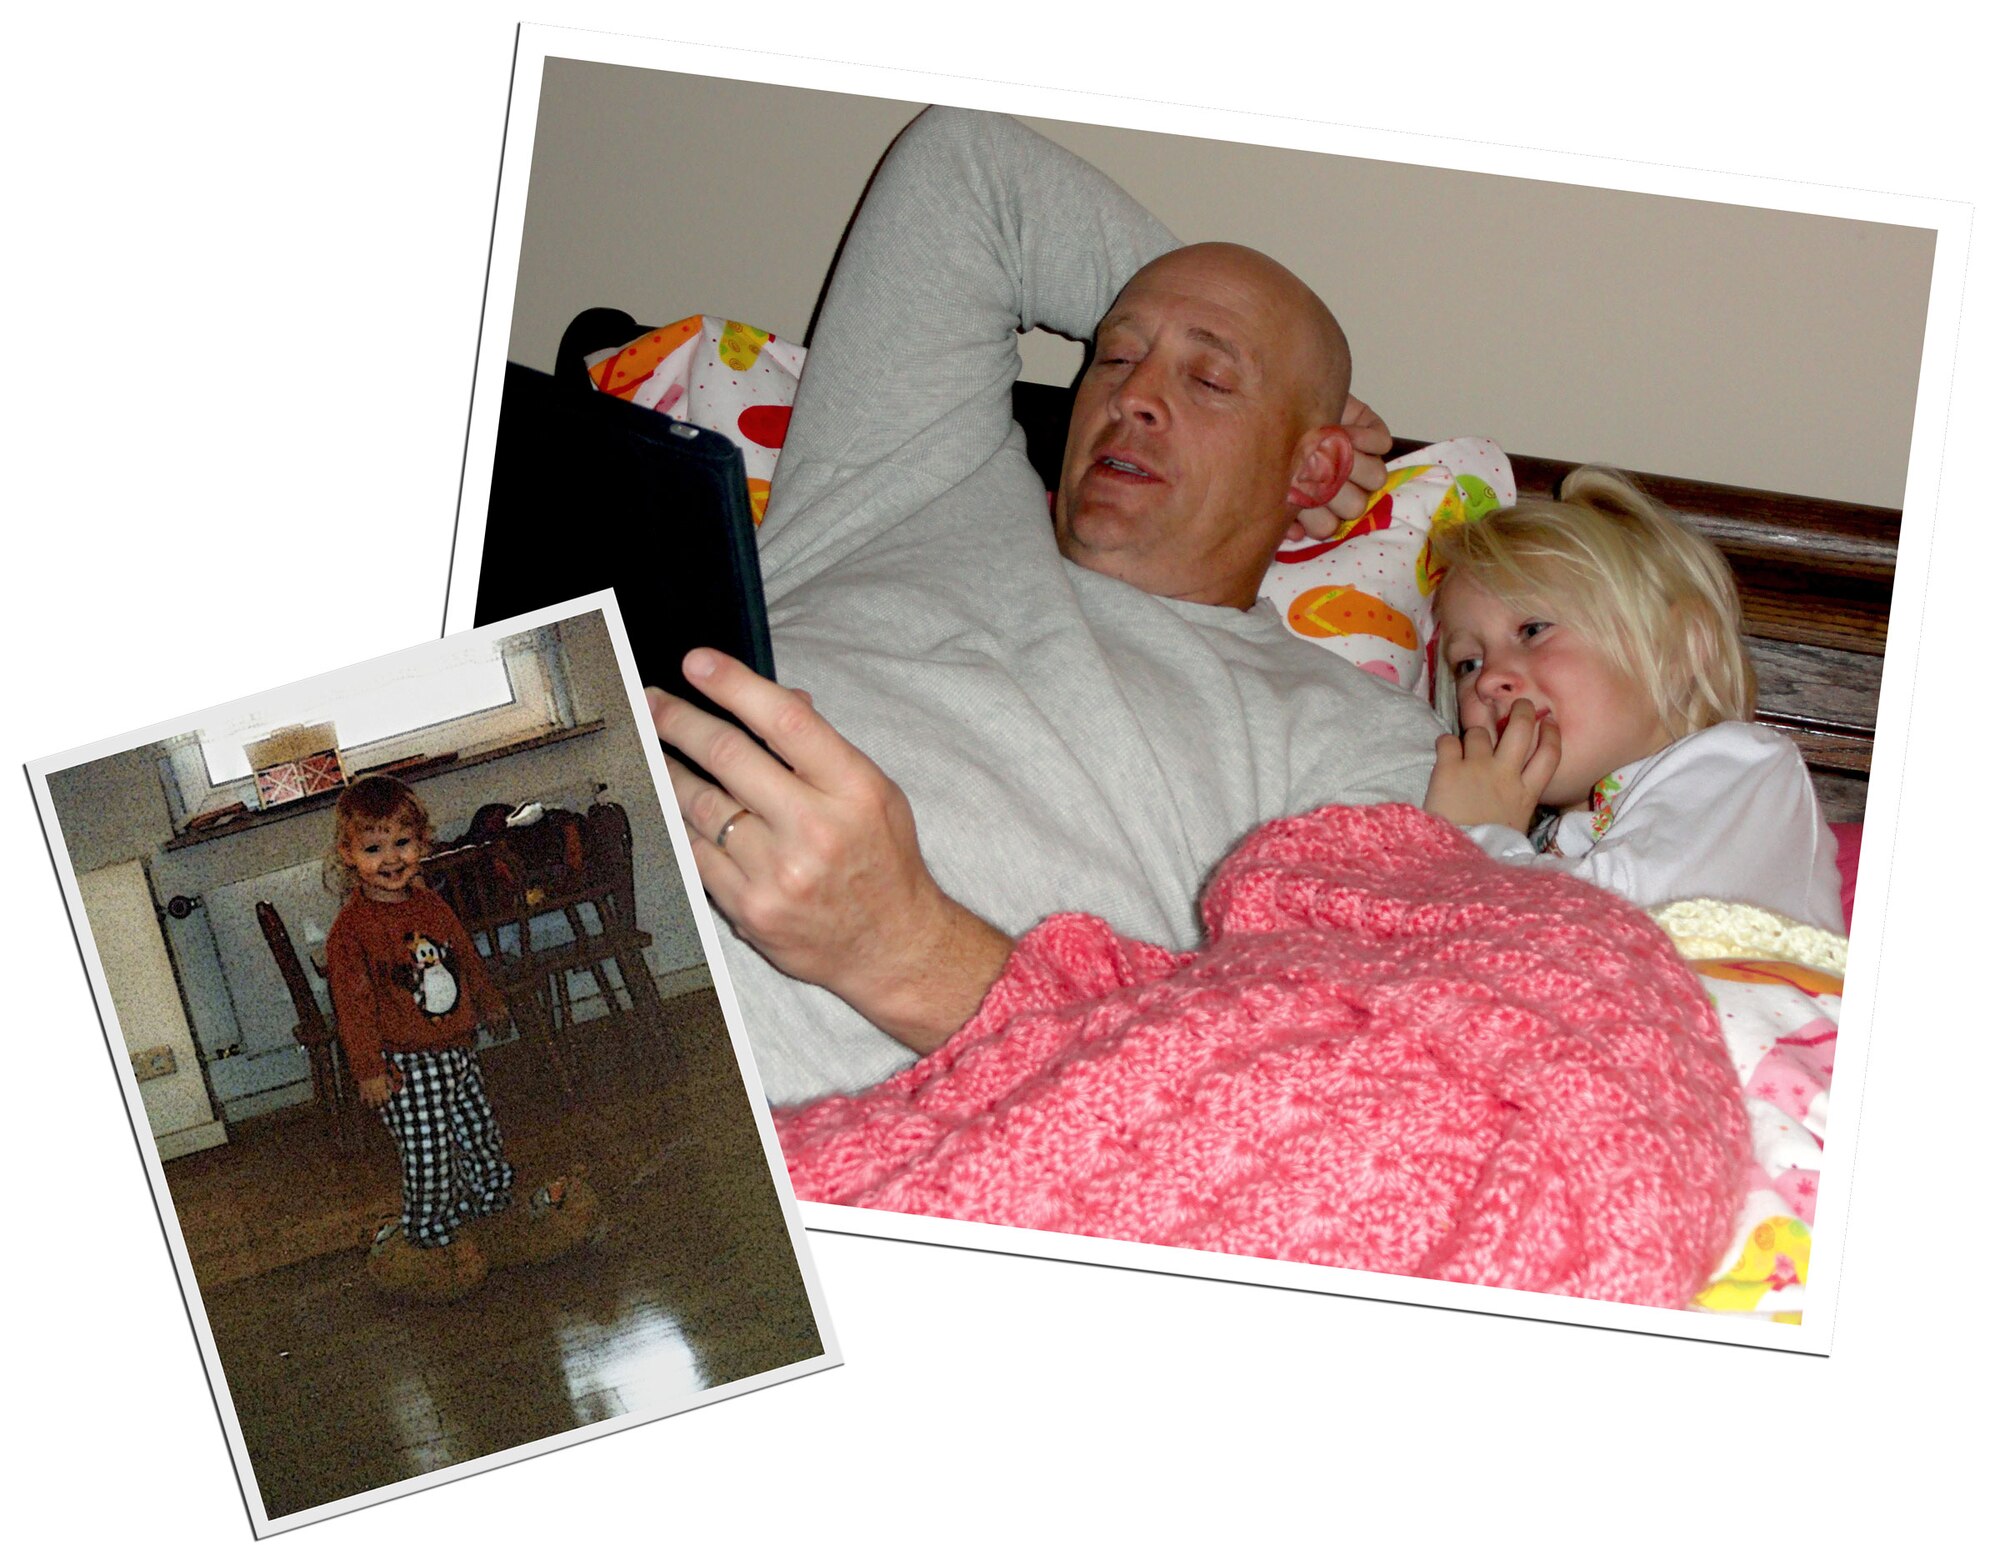 Mike Strickler, Edwards Public Affairs director, and granddaughter Zoe, read a bedtime story last December. Twenty-five years prior, his daughter Stephanie (below left) and son Michael motivated him to earn his first Community College of the Air Force degree. (Courtesy photos)